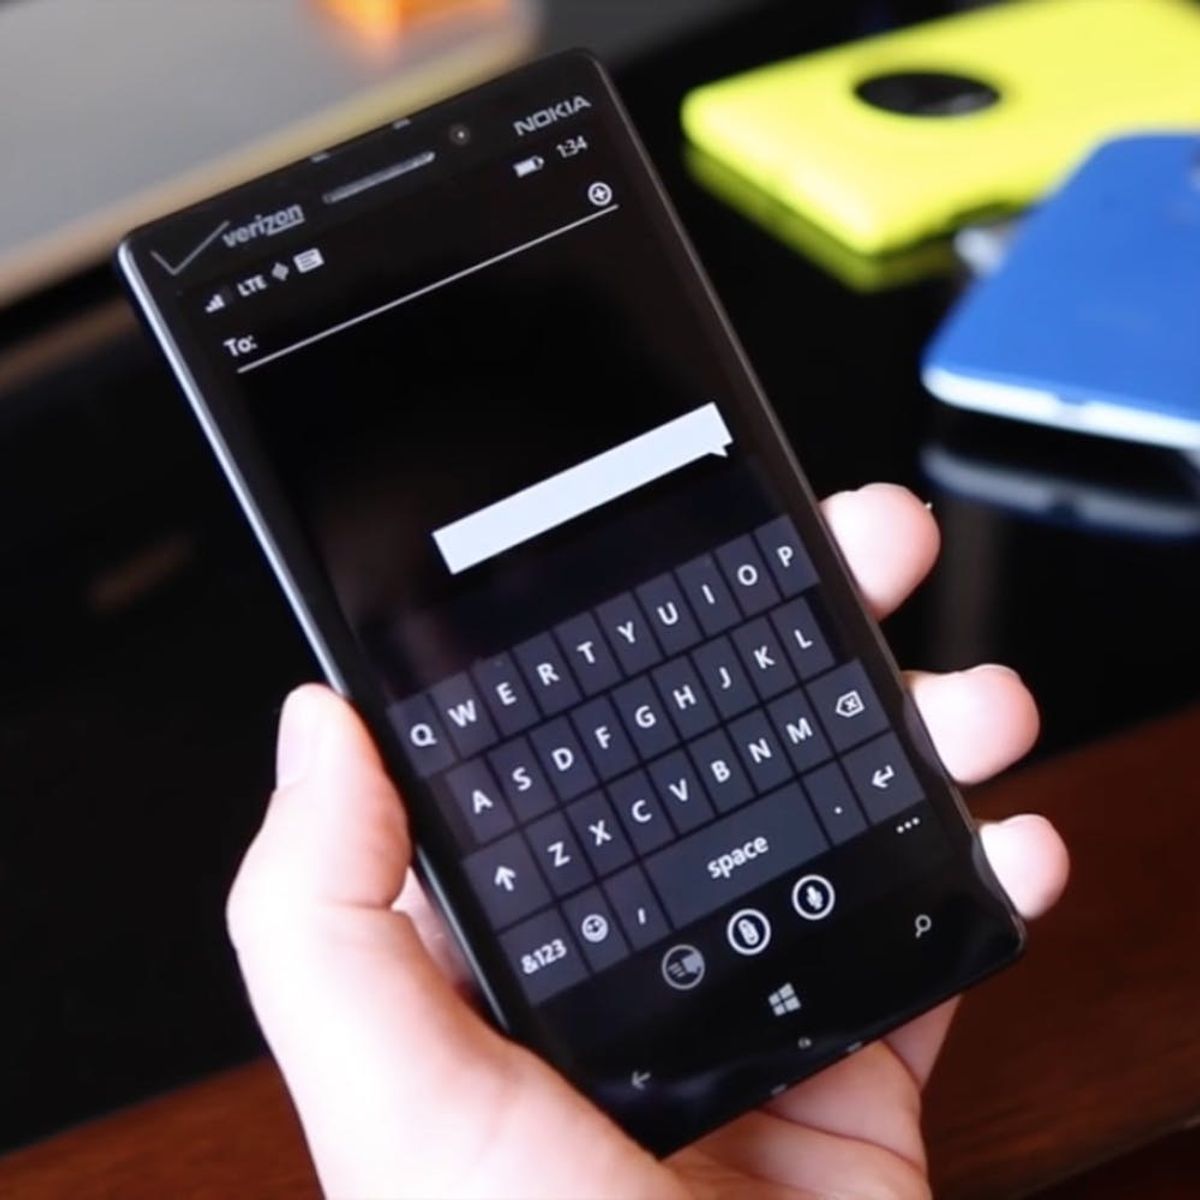 Here’s the New Microsoft Keyboard That You’re Going to Be Using On Your iPhone 24/7